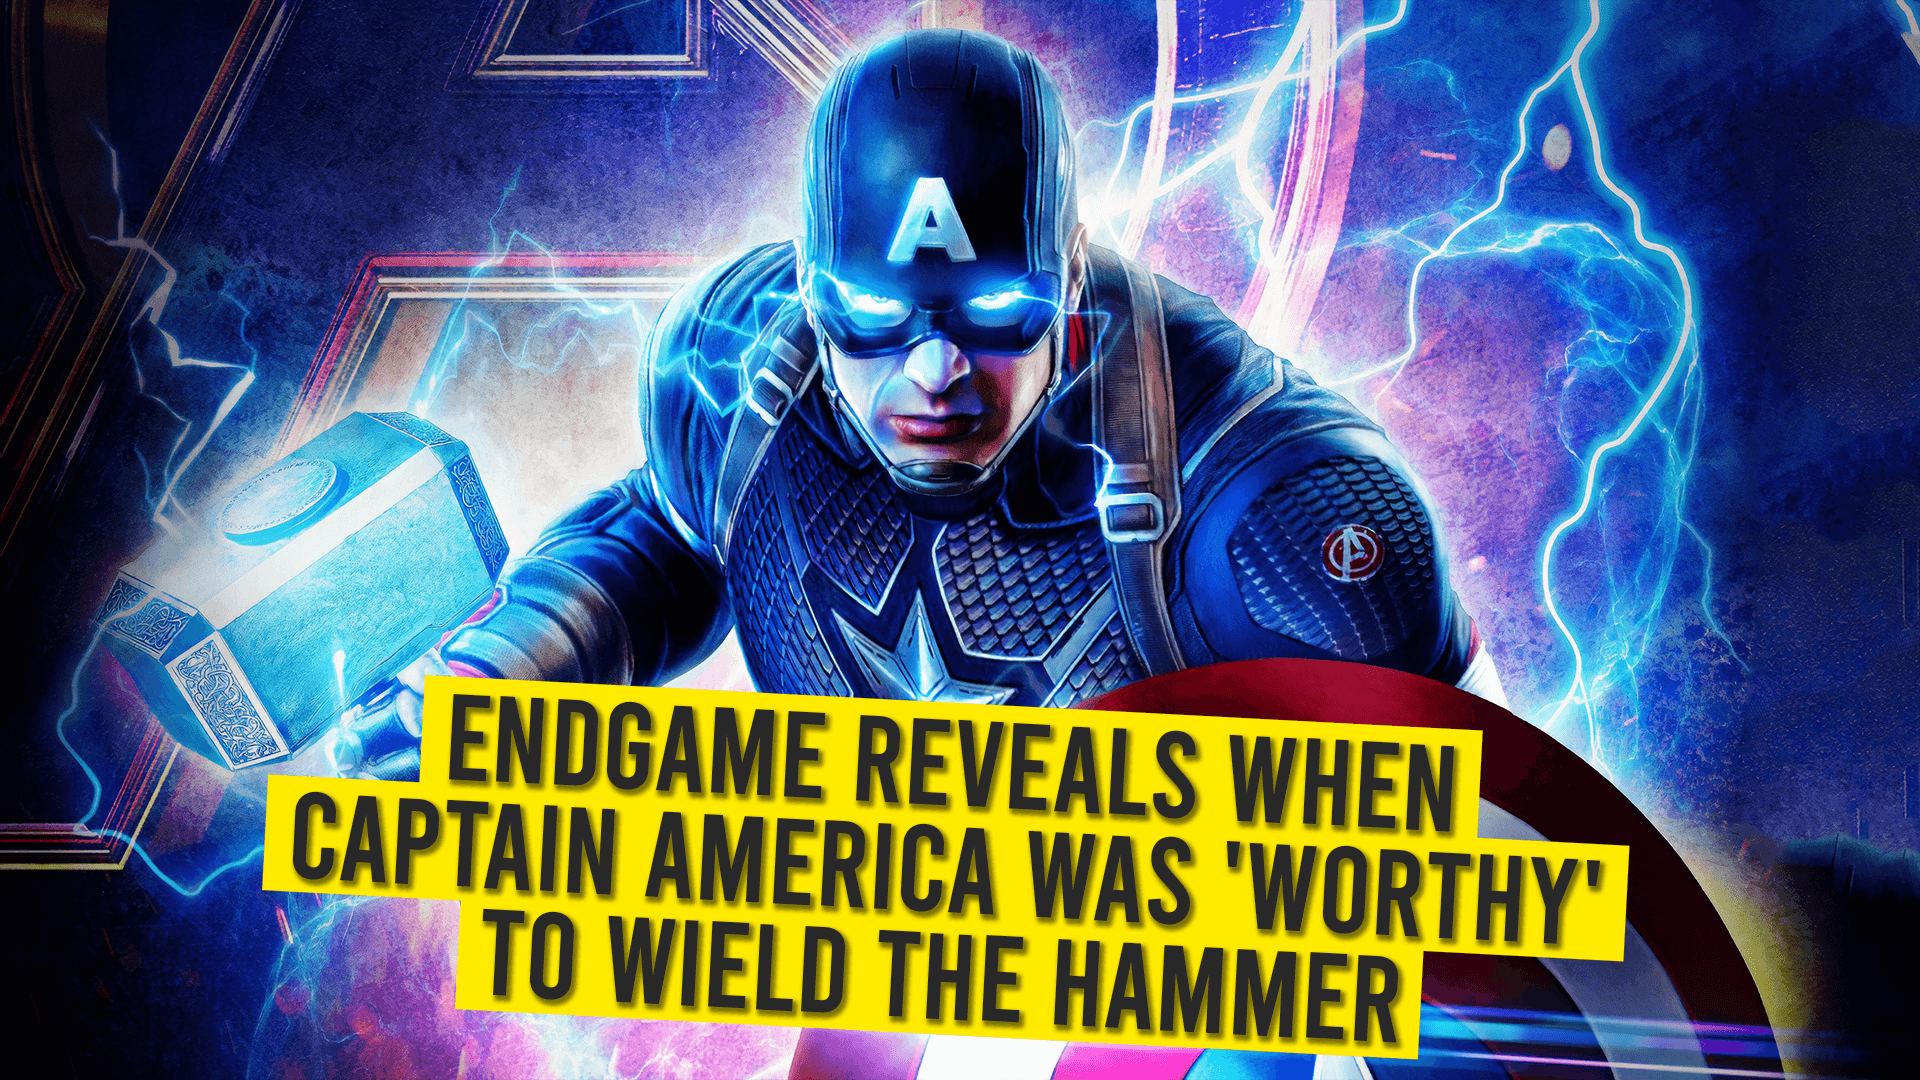 Endgame Reveals when Captain America was ‘Worthy’ to Wield the Hammer